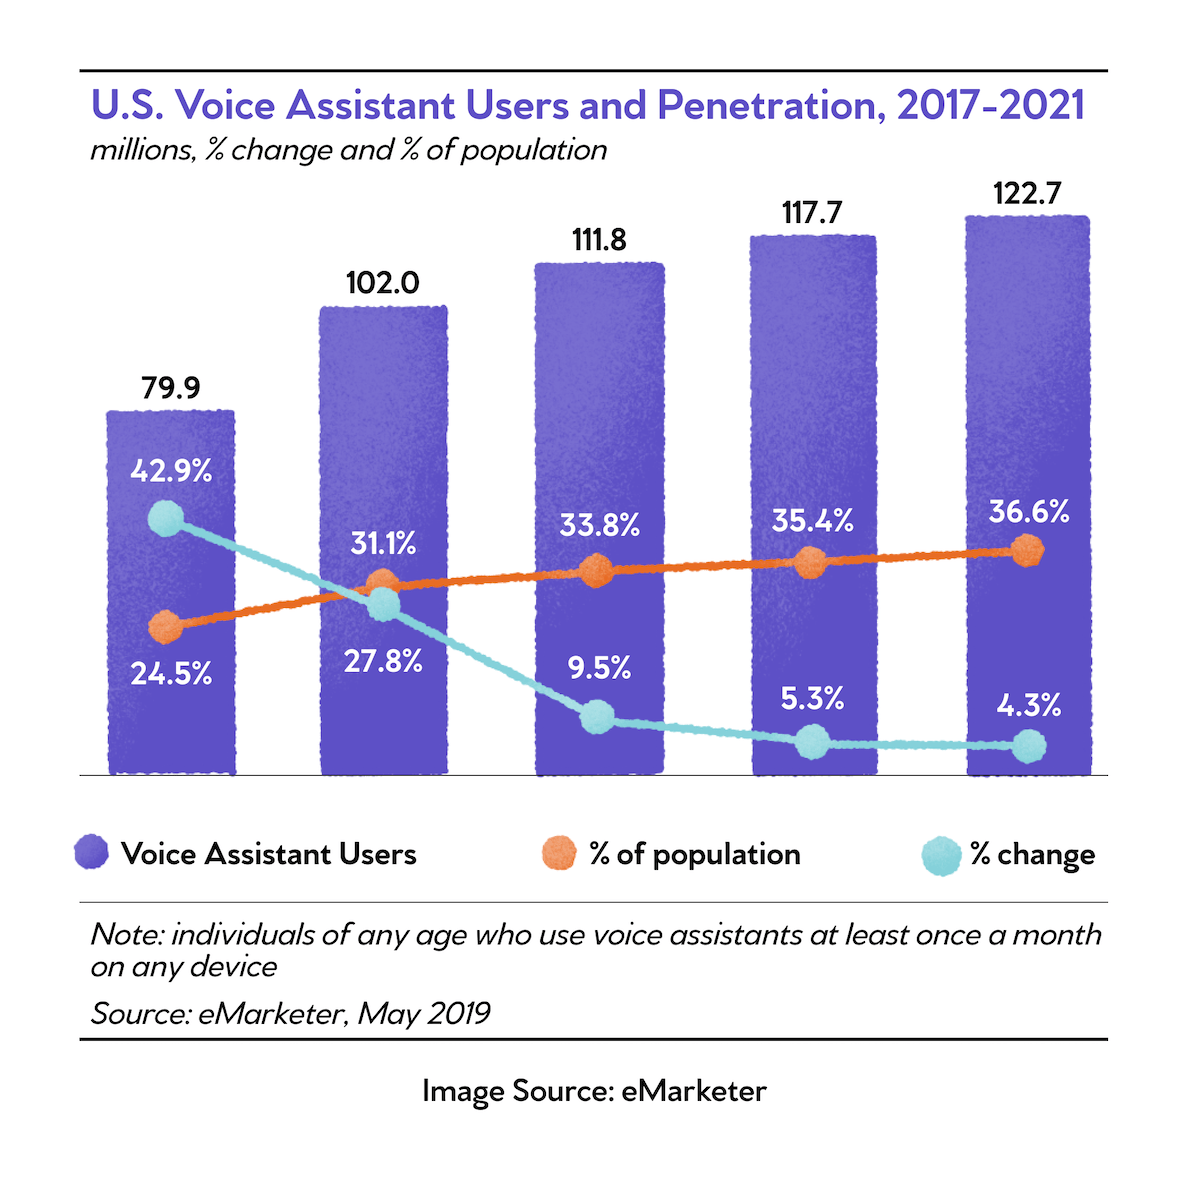 graph depicting the number of U.S. voice assistant users from 2017 and projected through 2021